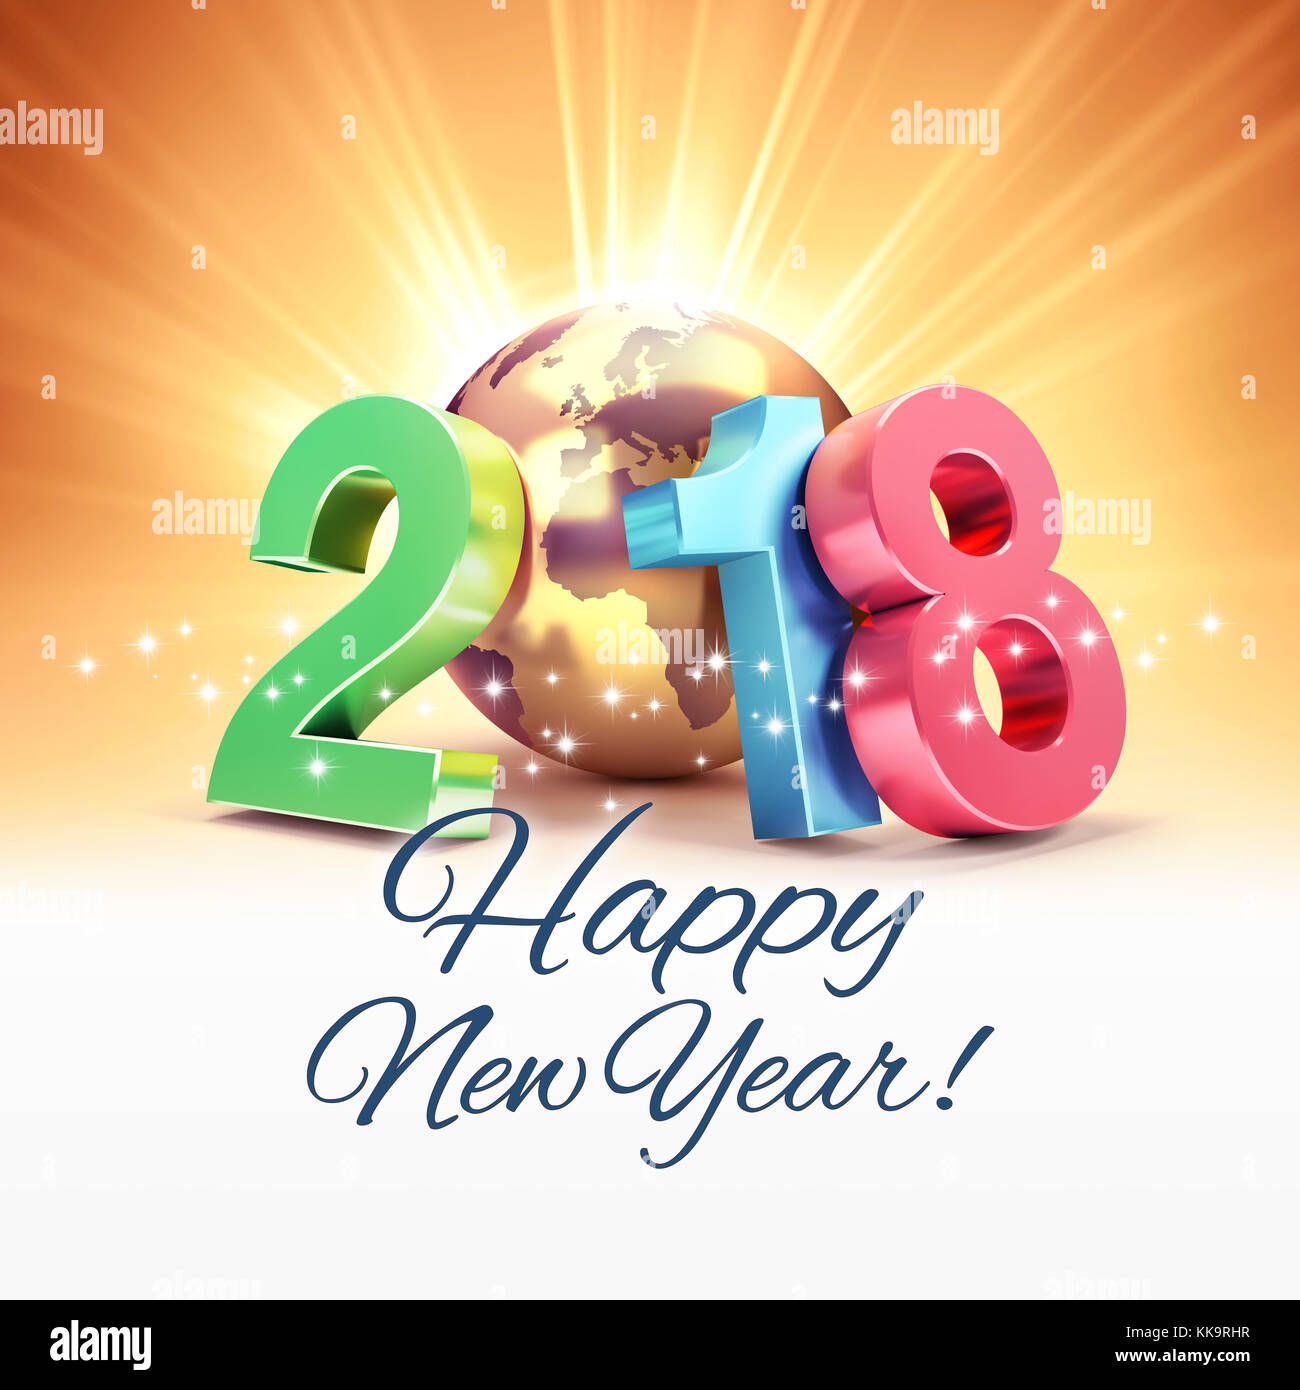 Greetings and colorful New Year date 2018, composed with a gold planet earth, on a sunny background - 3D illustration Stock Photo